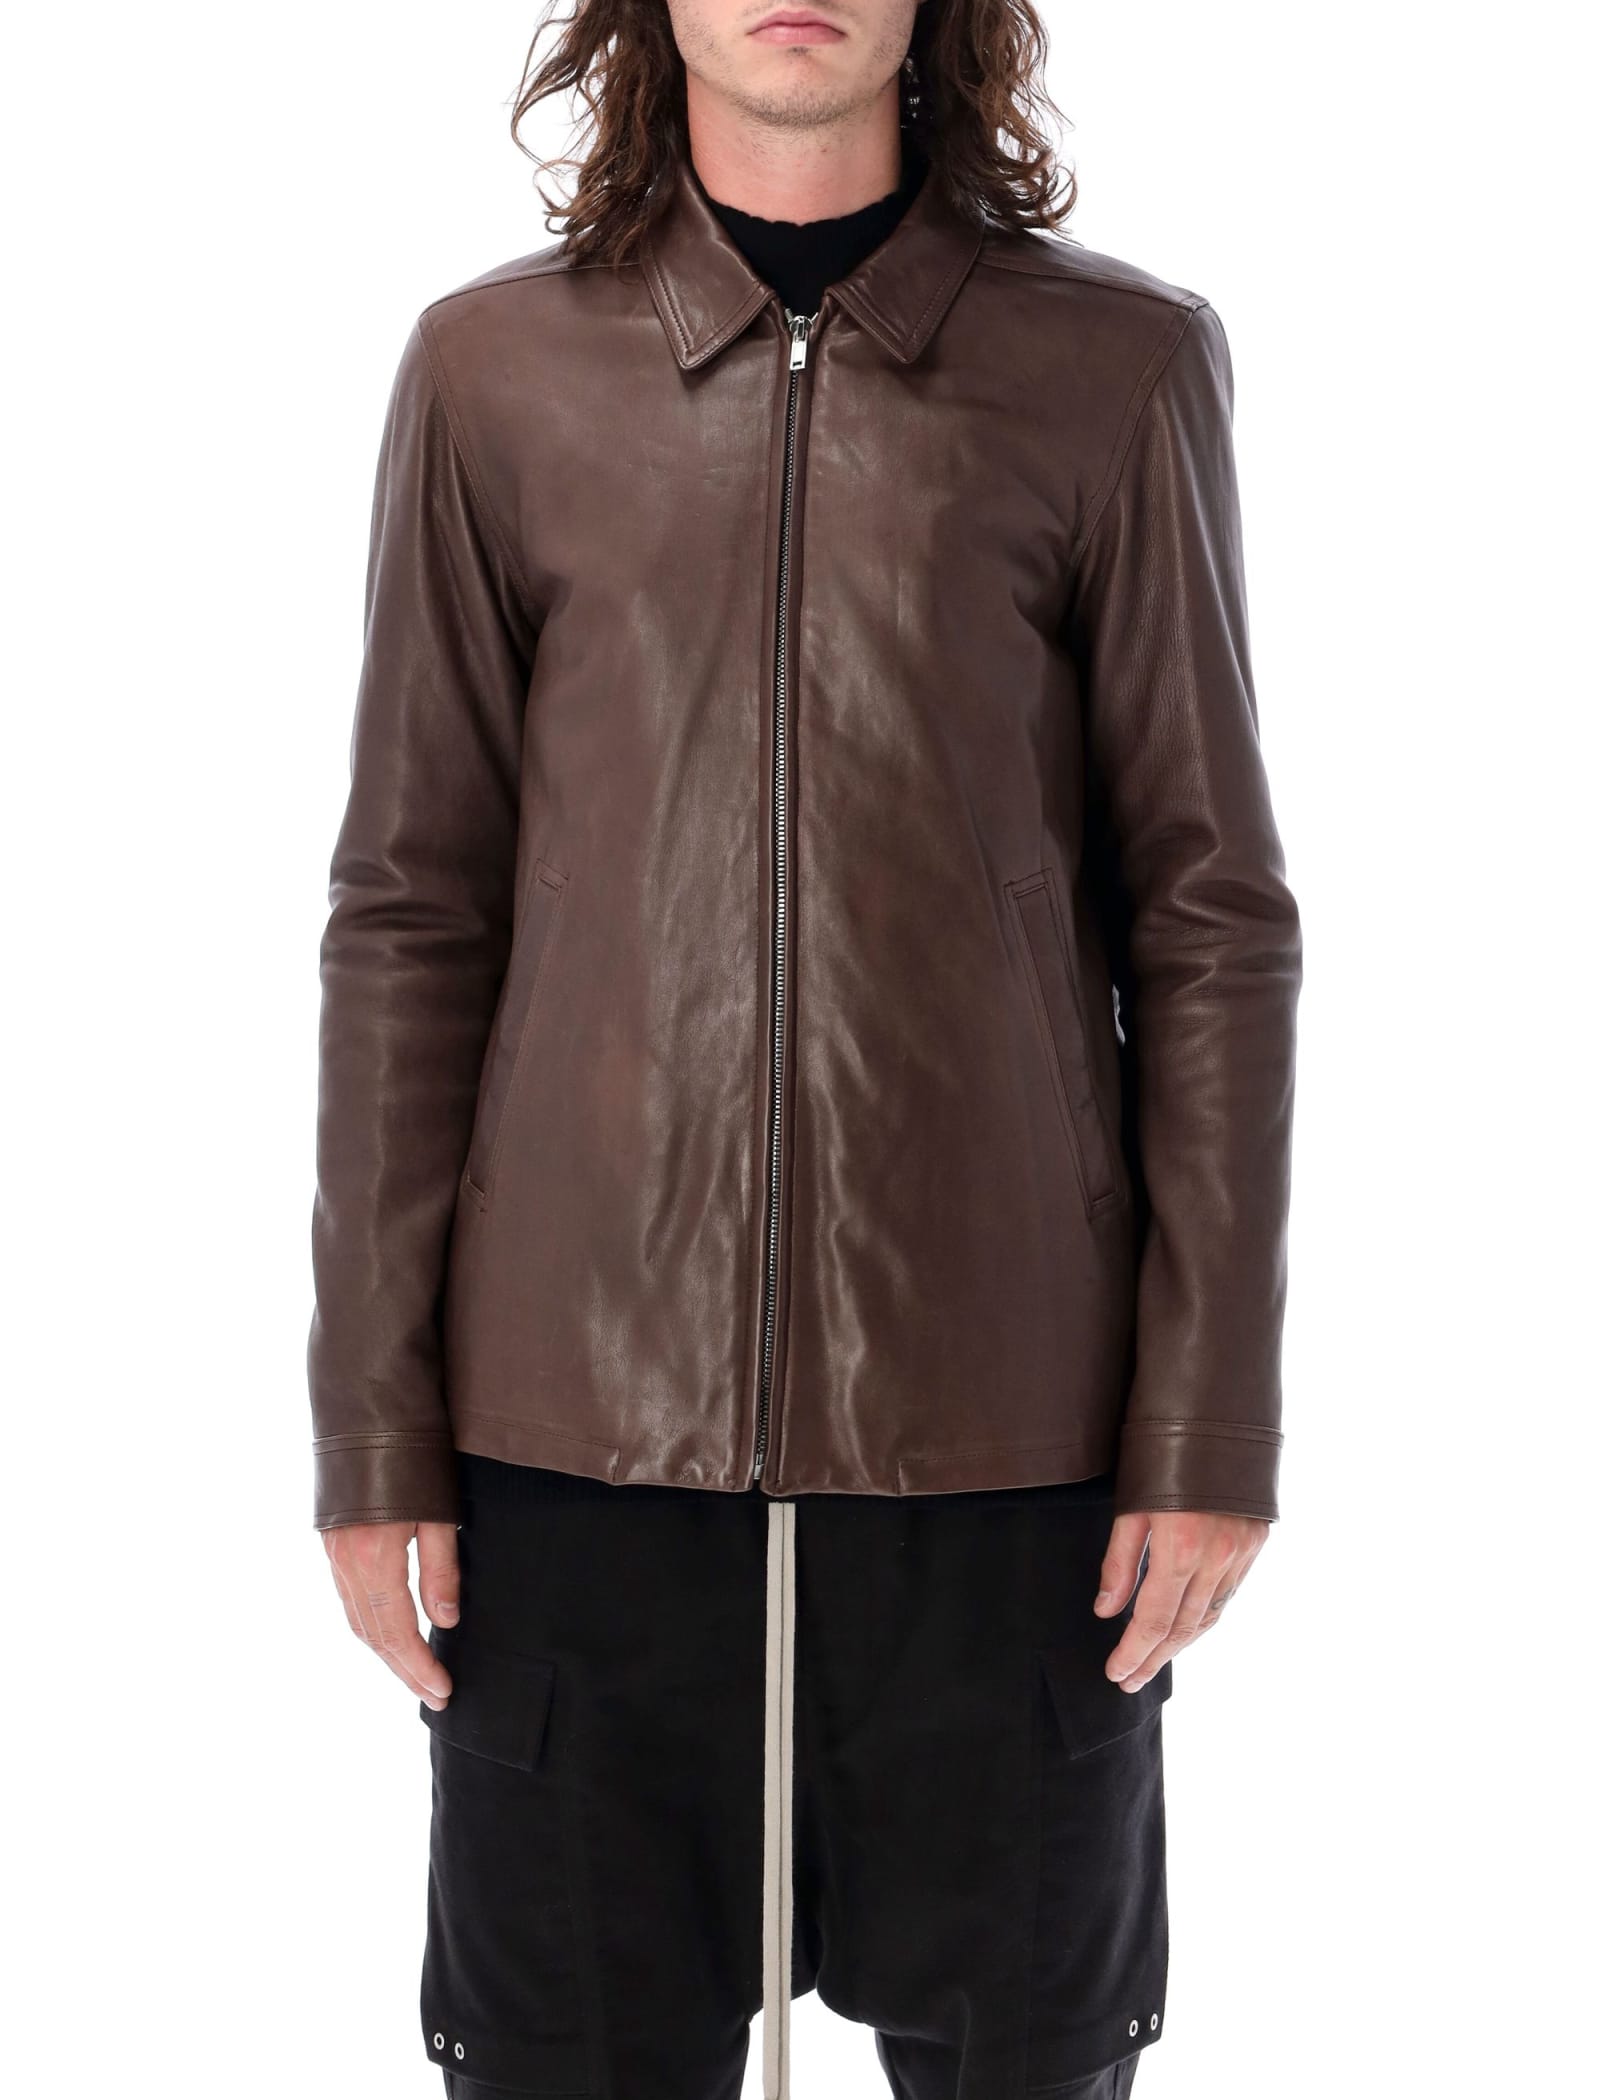 RICK OWENS BRED LEATHER JACKET